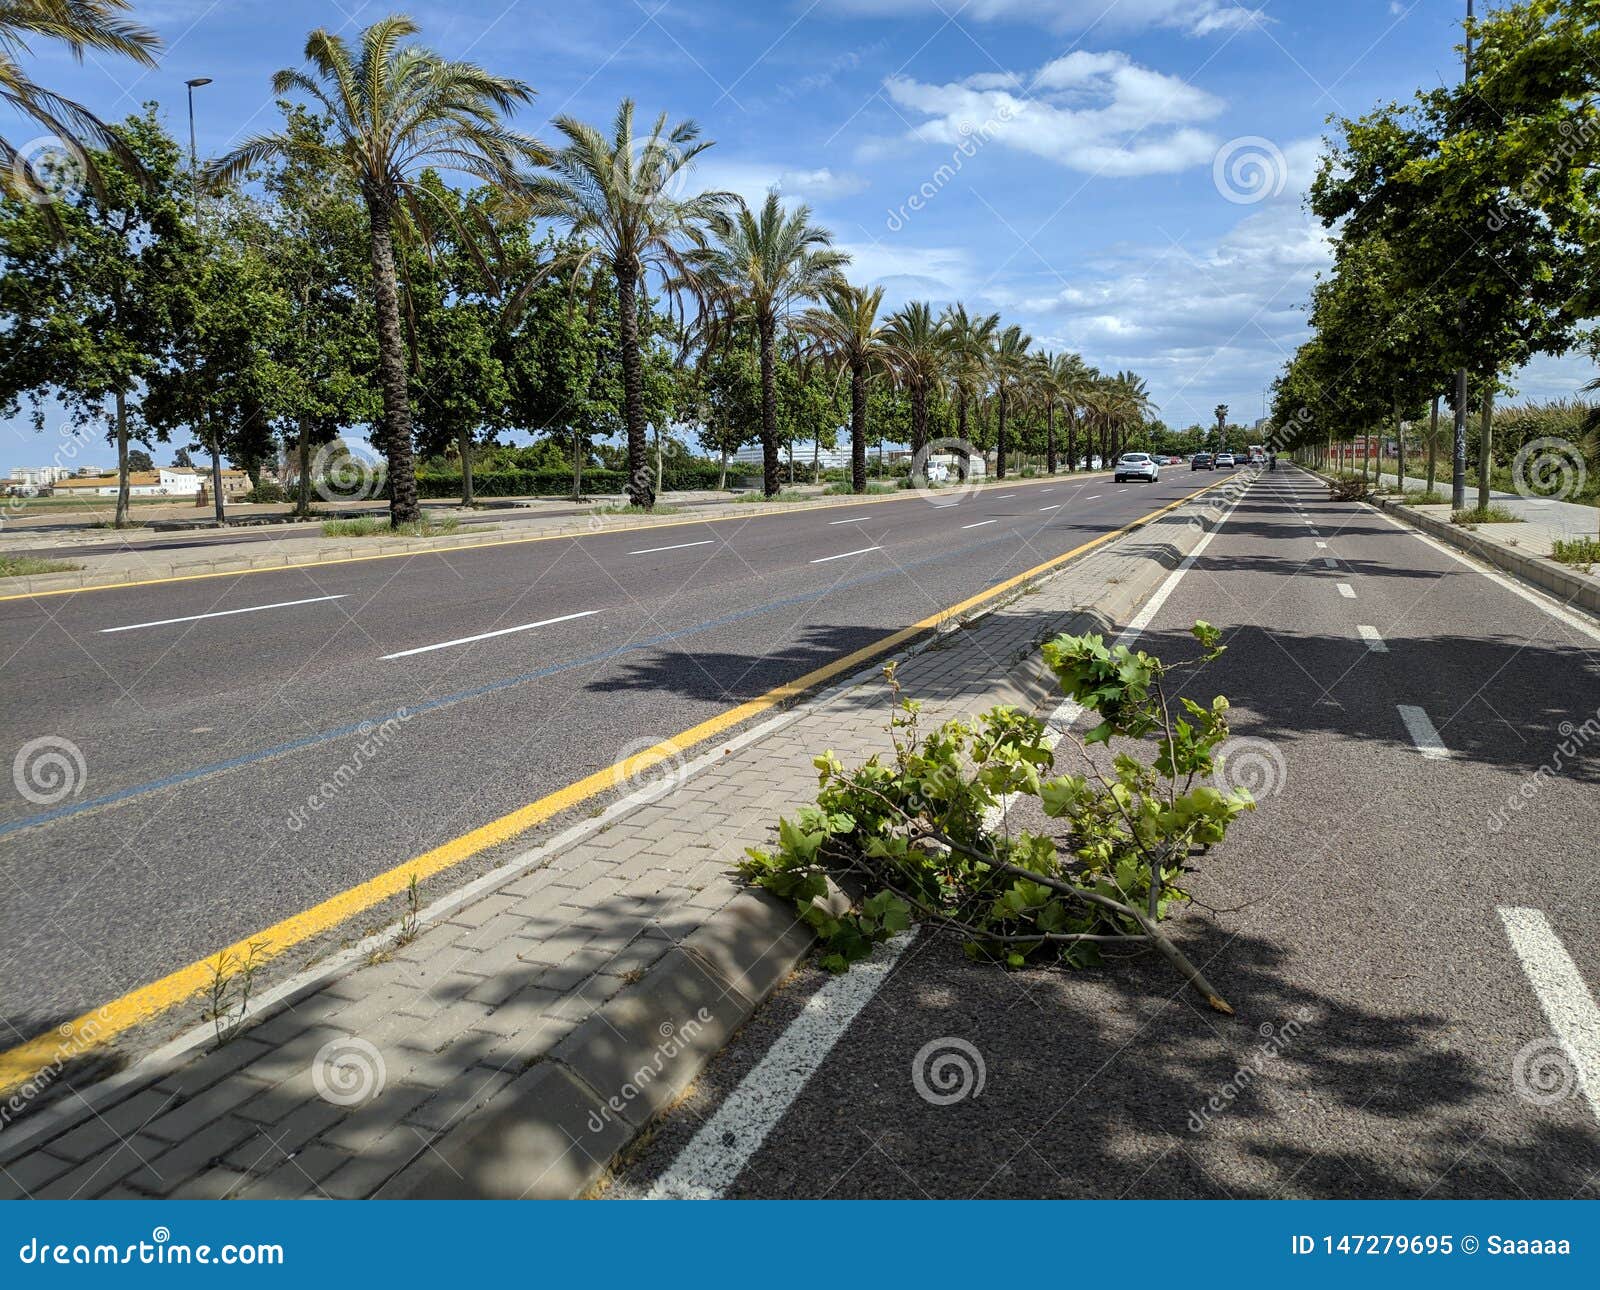 Windy Day with Tree Branches Over the Road Stock Image - Image of windy